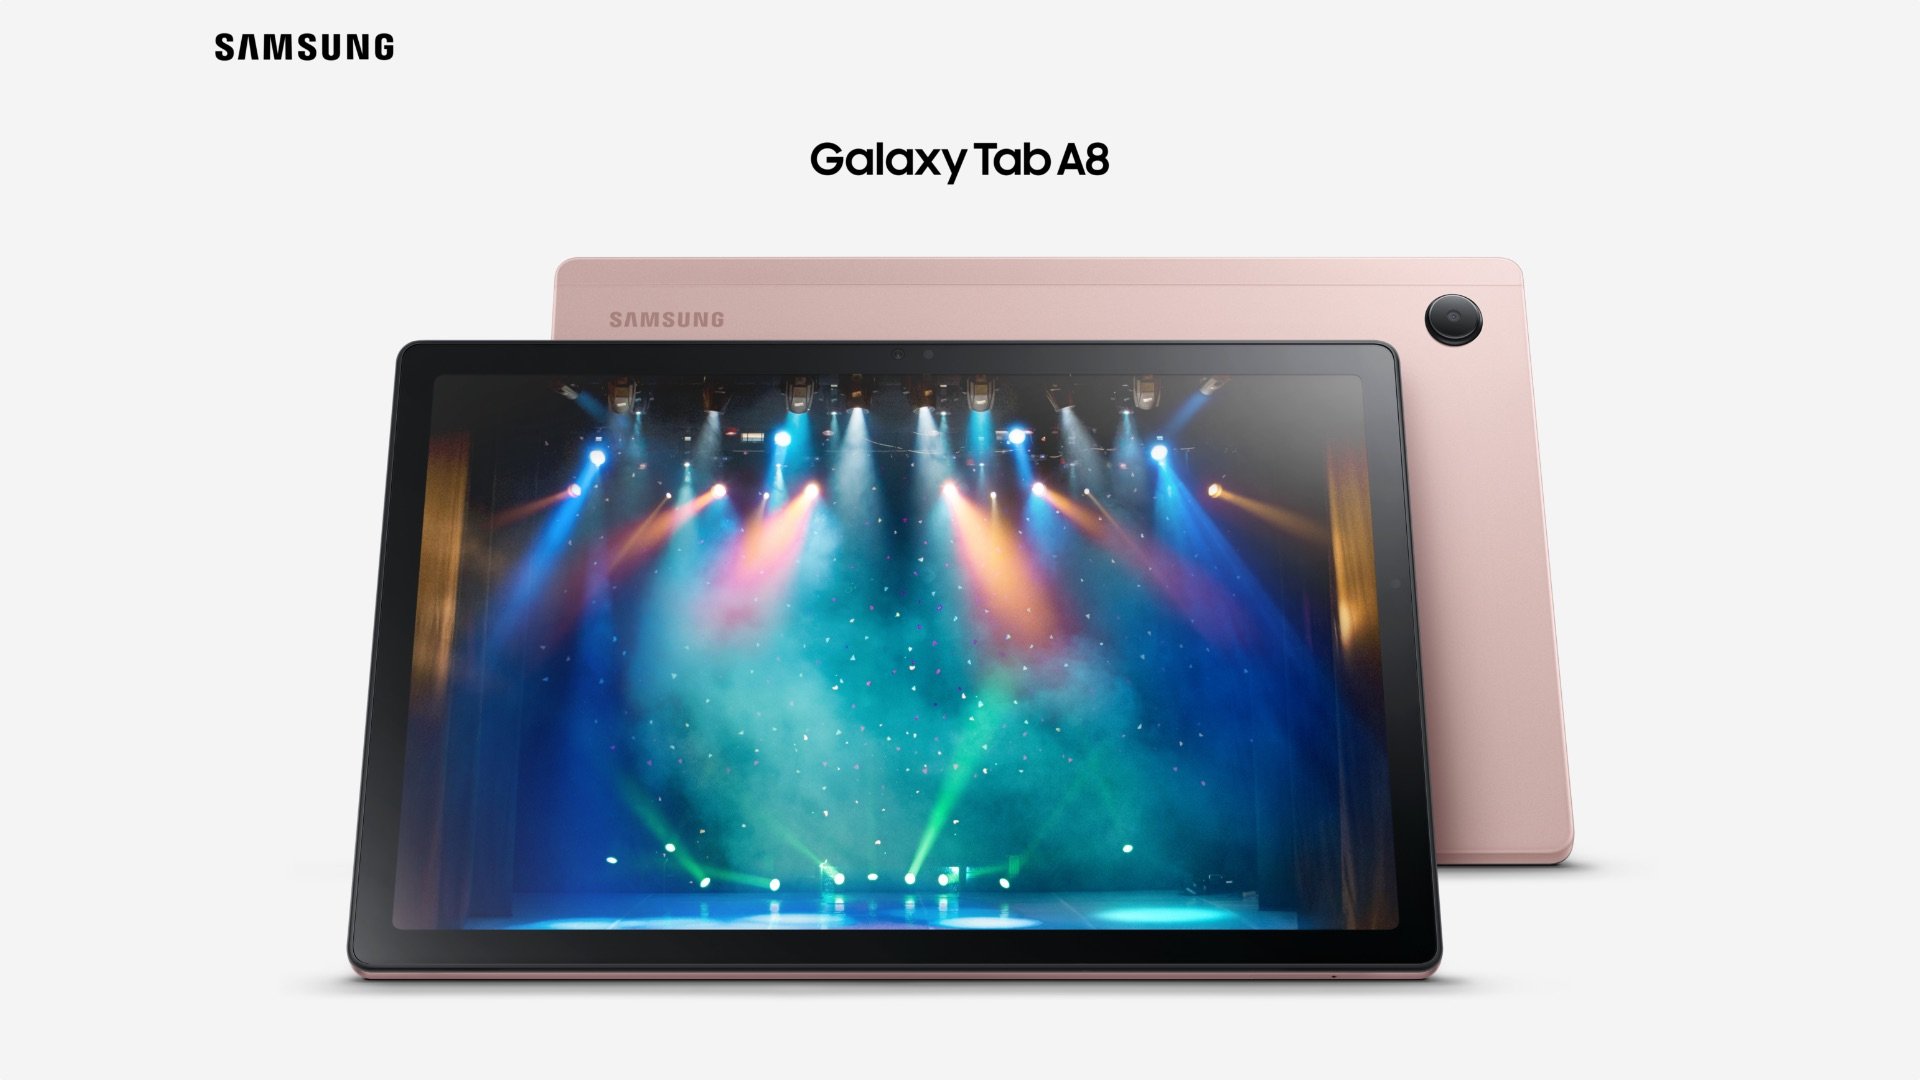 Samsung's new Galaxy Tab A8 budget tablet has reached another market